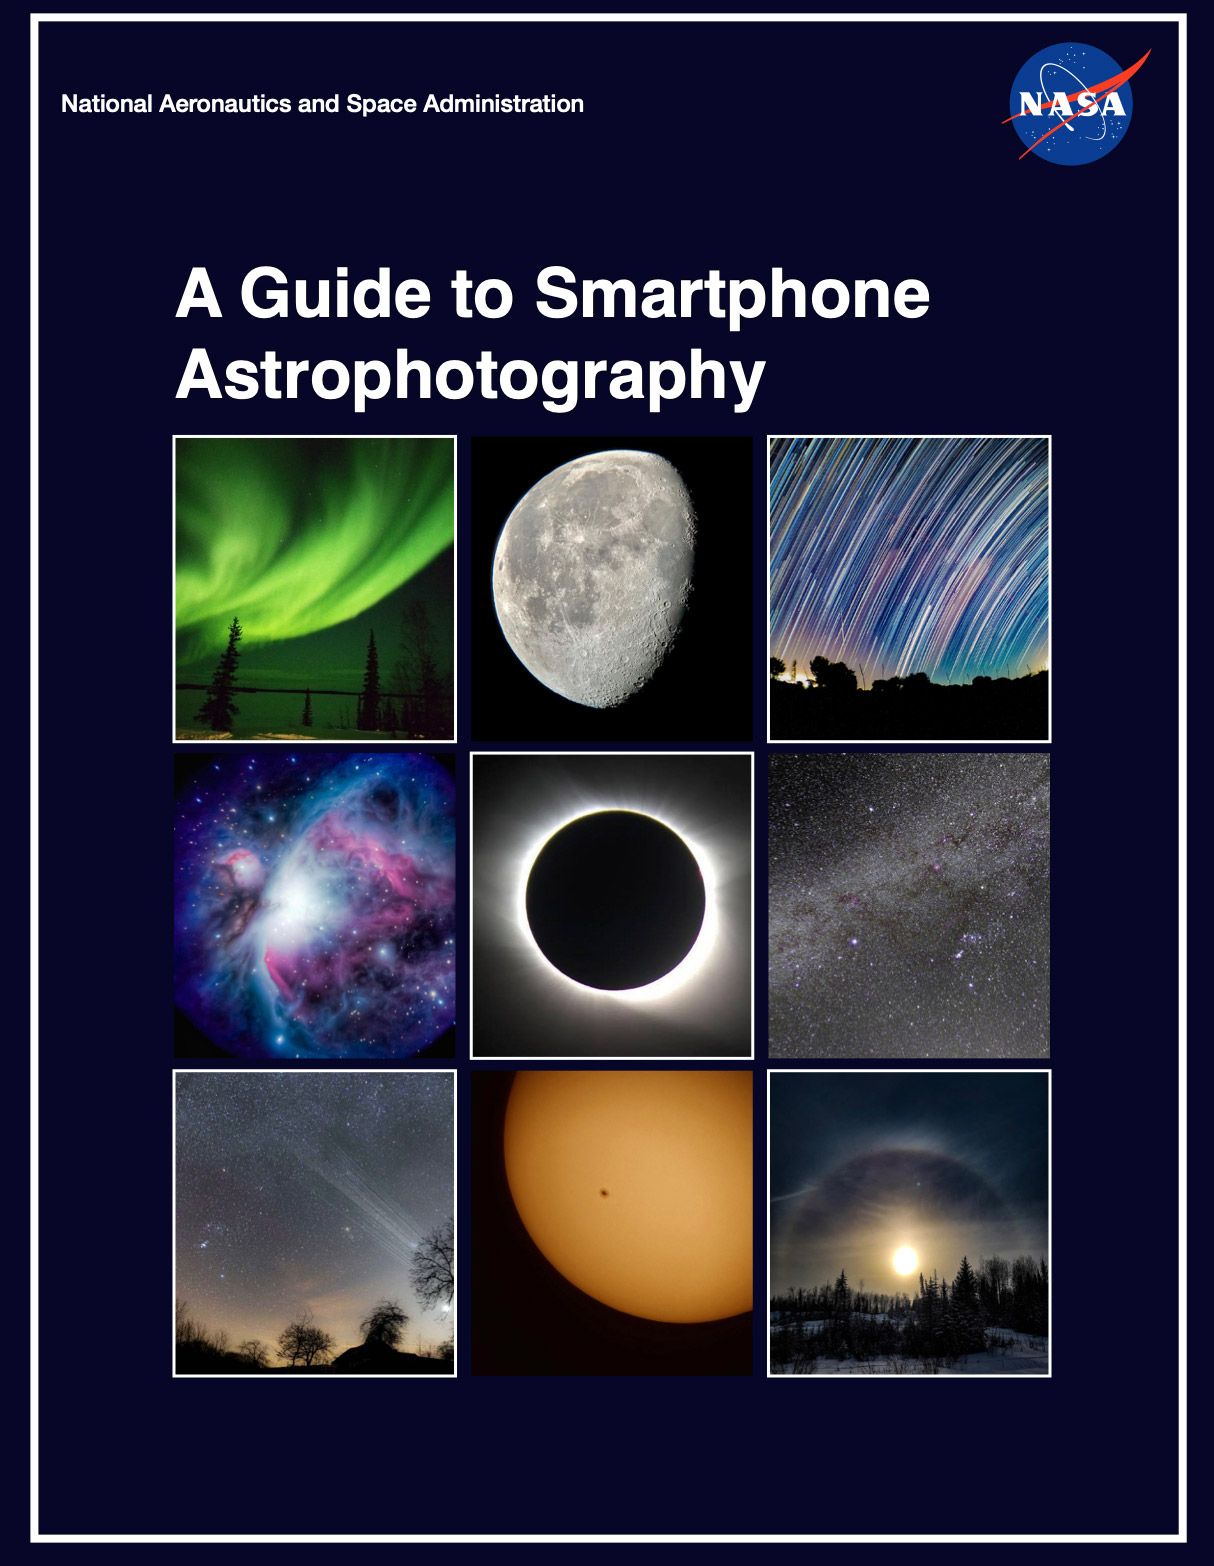 The cover of the book with the title of the book, “A Guide to Smartphone Astrophotography” in white tex on a black background. Above the title is a header: on the left, “National Astronautics and Space Administration” in small, white font; on the right the NASA logo, a blue circle with the all caps text, “NASA” in the middle of the circle.”Nine images below the title, from left to right: Green aurora in the night skyA waning gibbous moon on a black backgroundLong exposure image of stars in the night skyDeep space image showing stars, dust, and gas in dark blues, purples, and pinks.A total solar eclipse; the Sun is behind the blacked out Moon, with the Sun’s corona visible from behind the Moon. A starry night sky with the Milky Way glowing in a lighter gray arch across the imageNight sky at sunset, with dark trees in the foregroundThe Sun, showing two sunspots.A picture of the Sun with a halo around it. Dark trees in the foreground